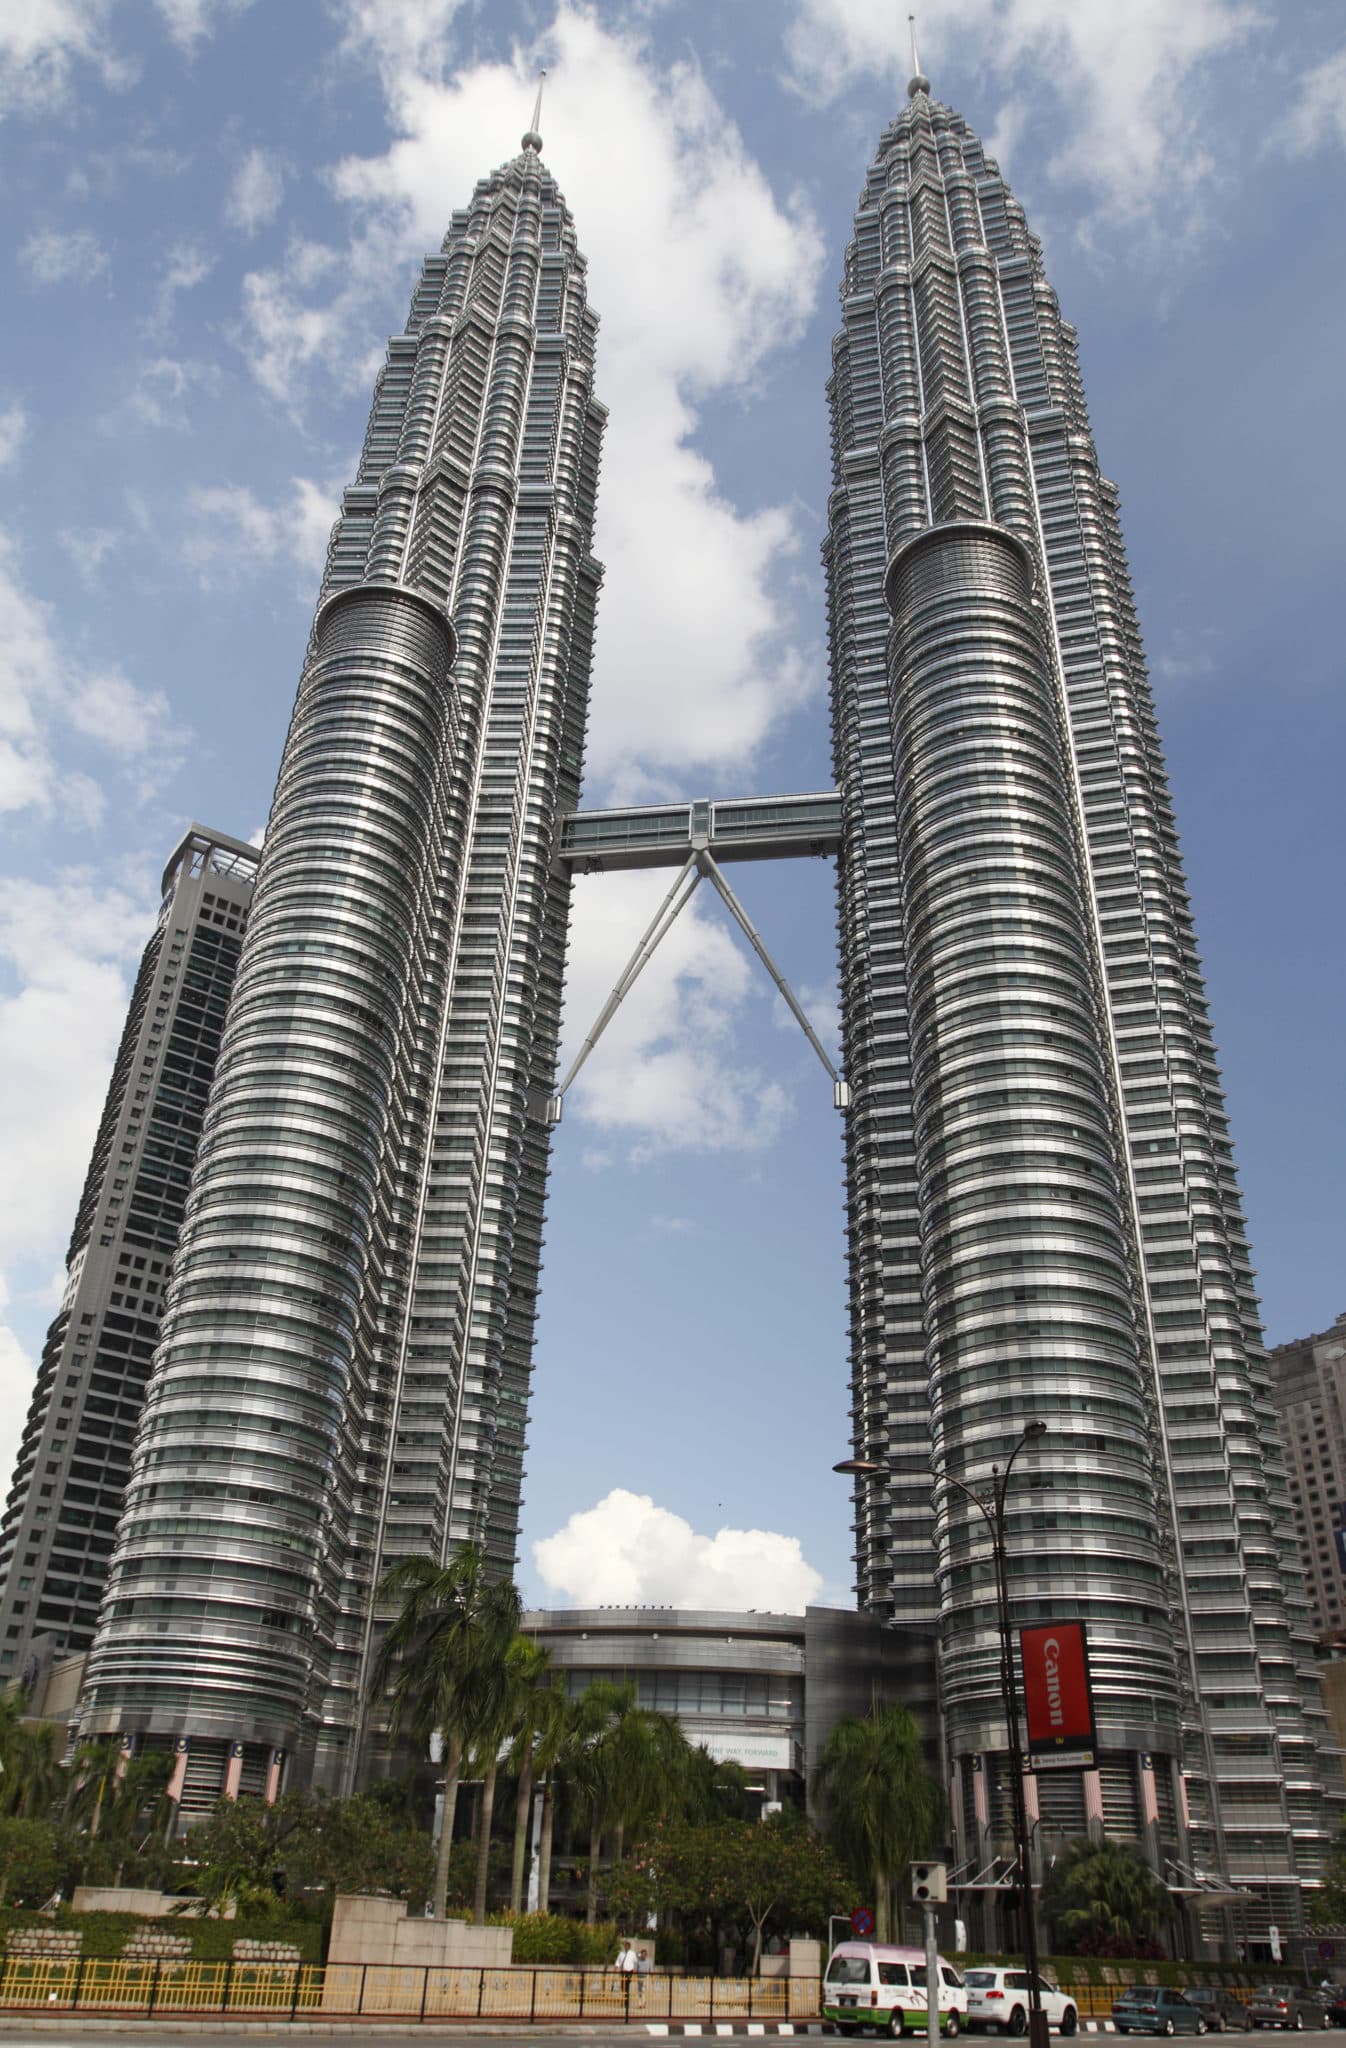 Petronas Twin Towers Time To Witness Some Architectural Beauties Found The World Twin towers correctional facility, los angeles, california. petronas twin towers time to witness